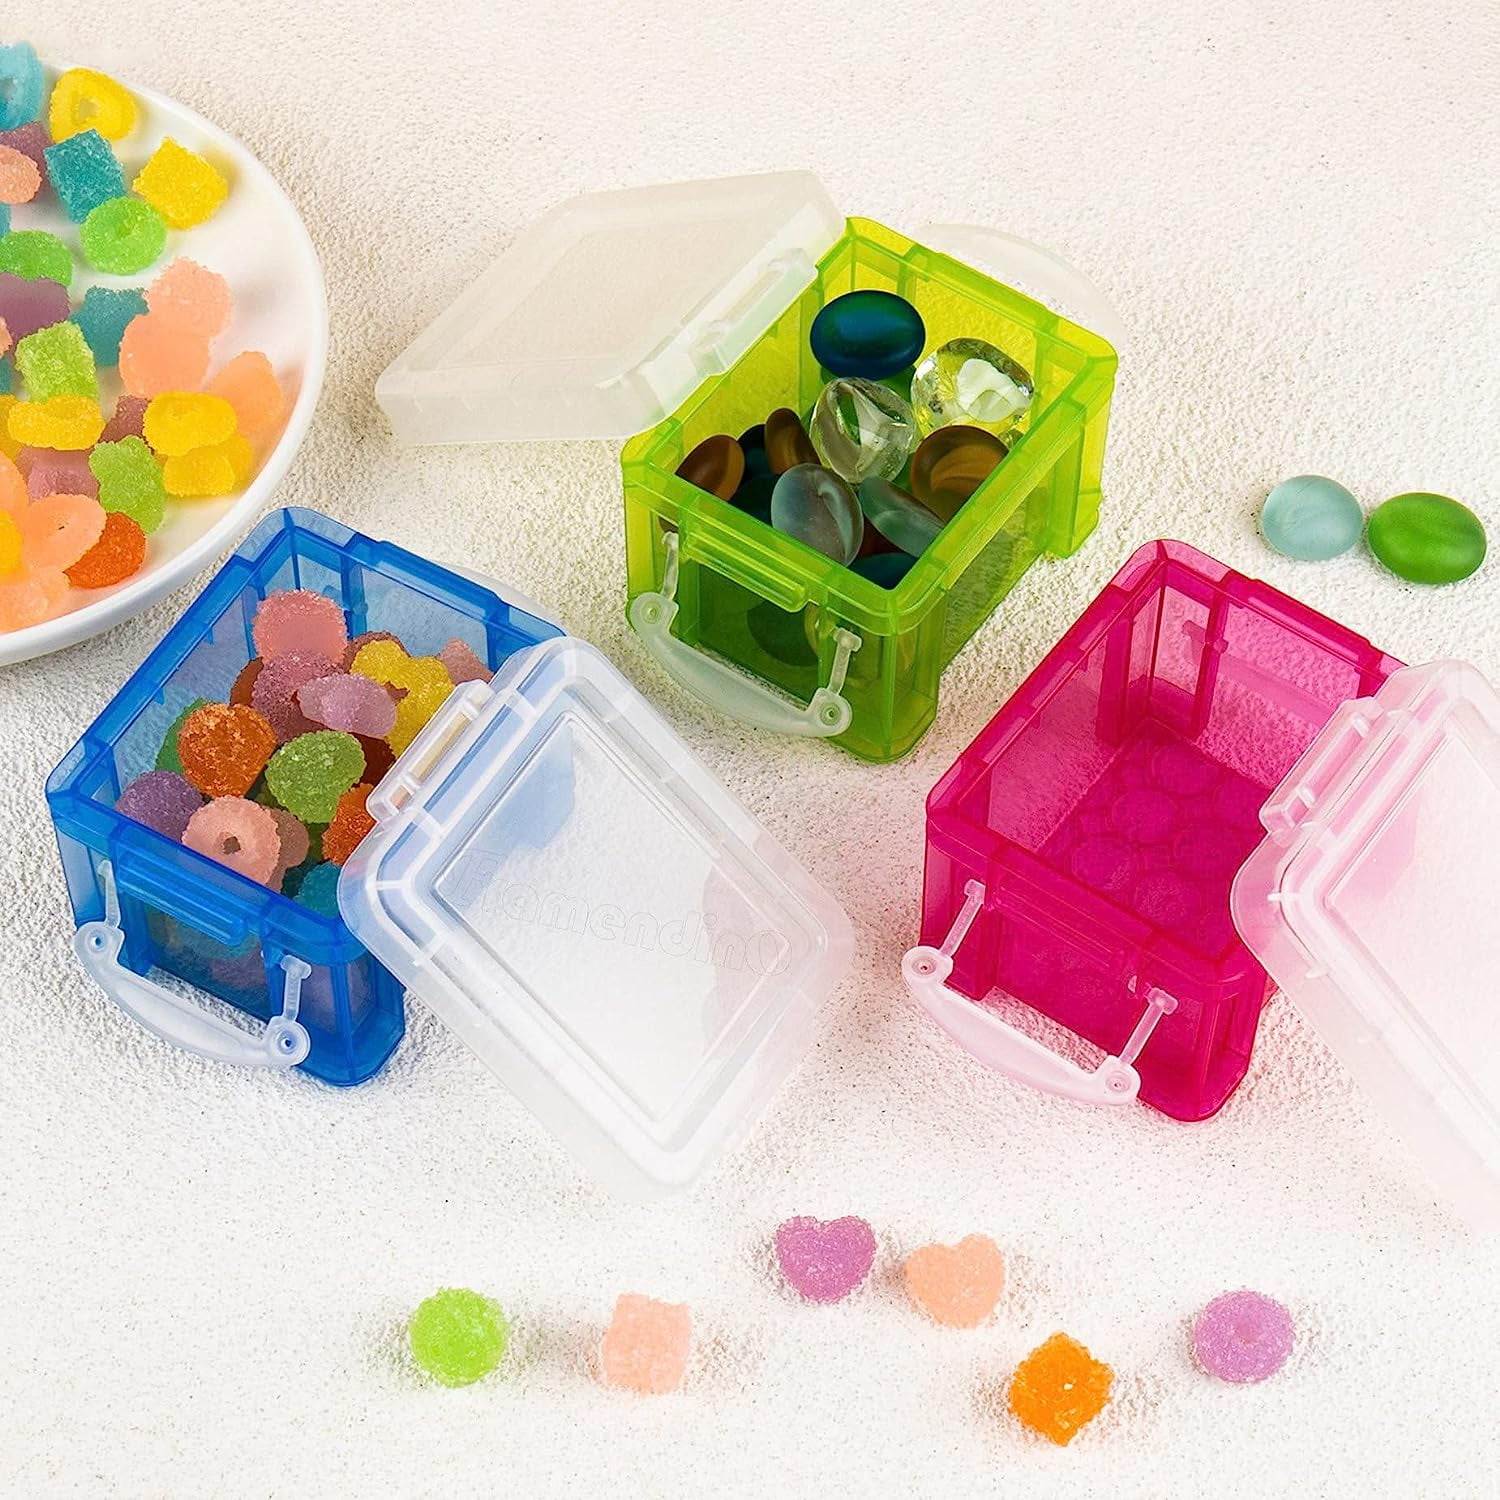  XSMYXSY 6Pack Colorful small plastic containers, 5.3